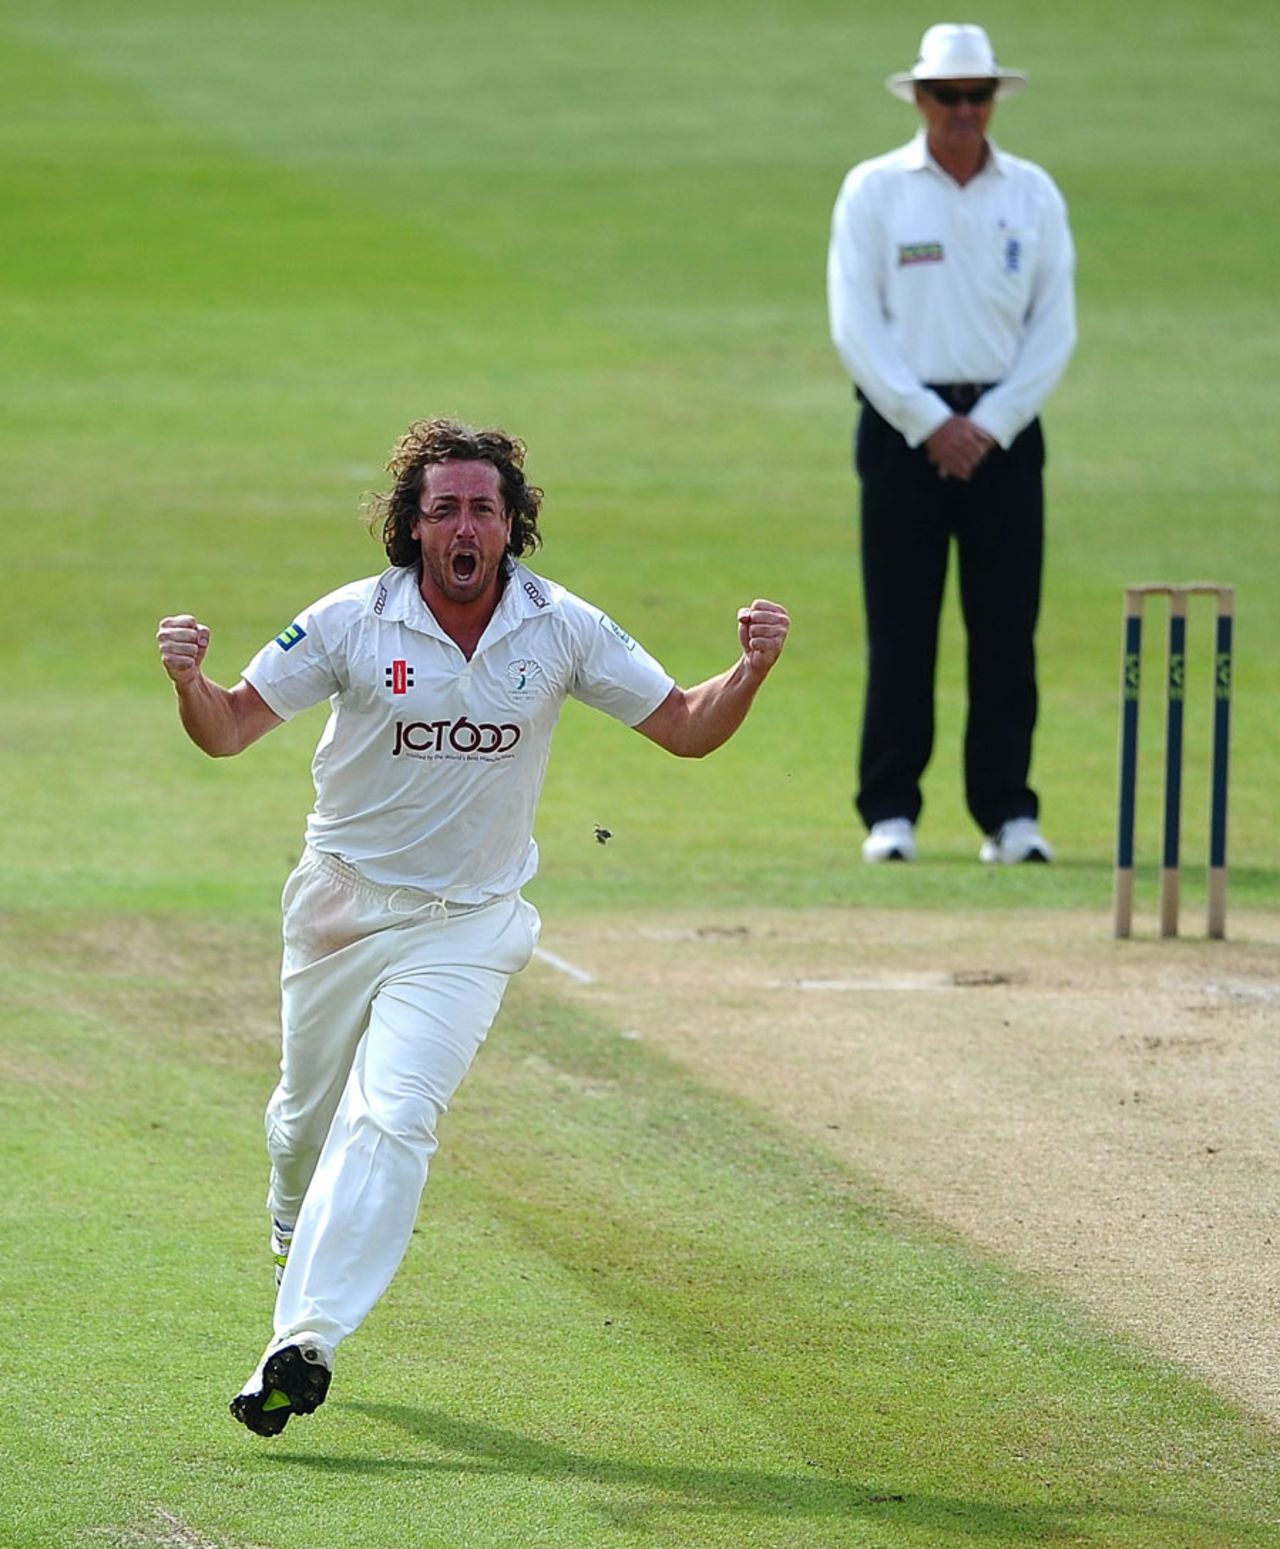 Ryan Sidebottom celebrates a wicket, Nottinghamshire v Yorkshire, County Championship, Division One, Trent Bridge, 3rd day, August 23, 2013